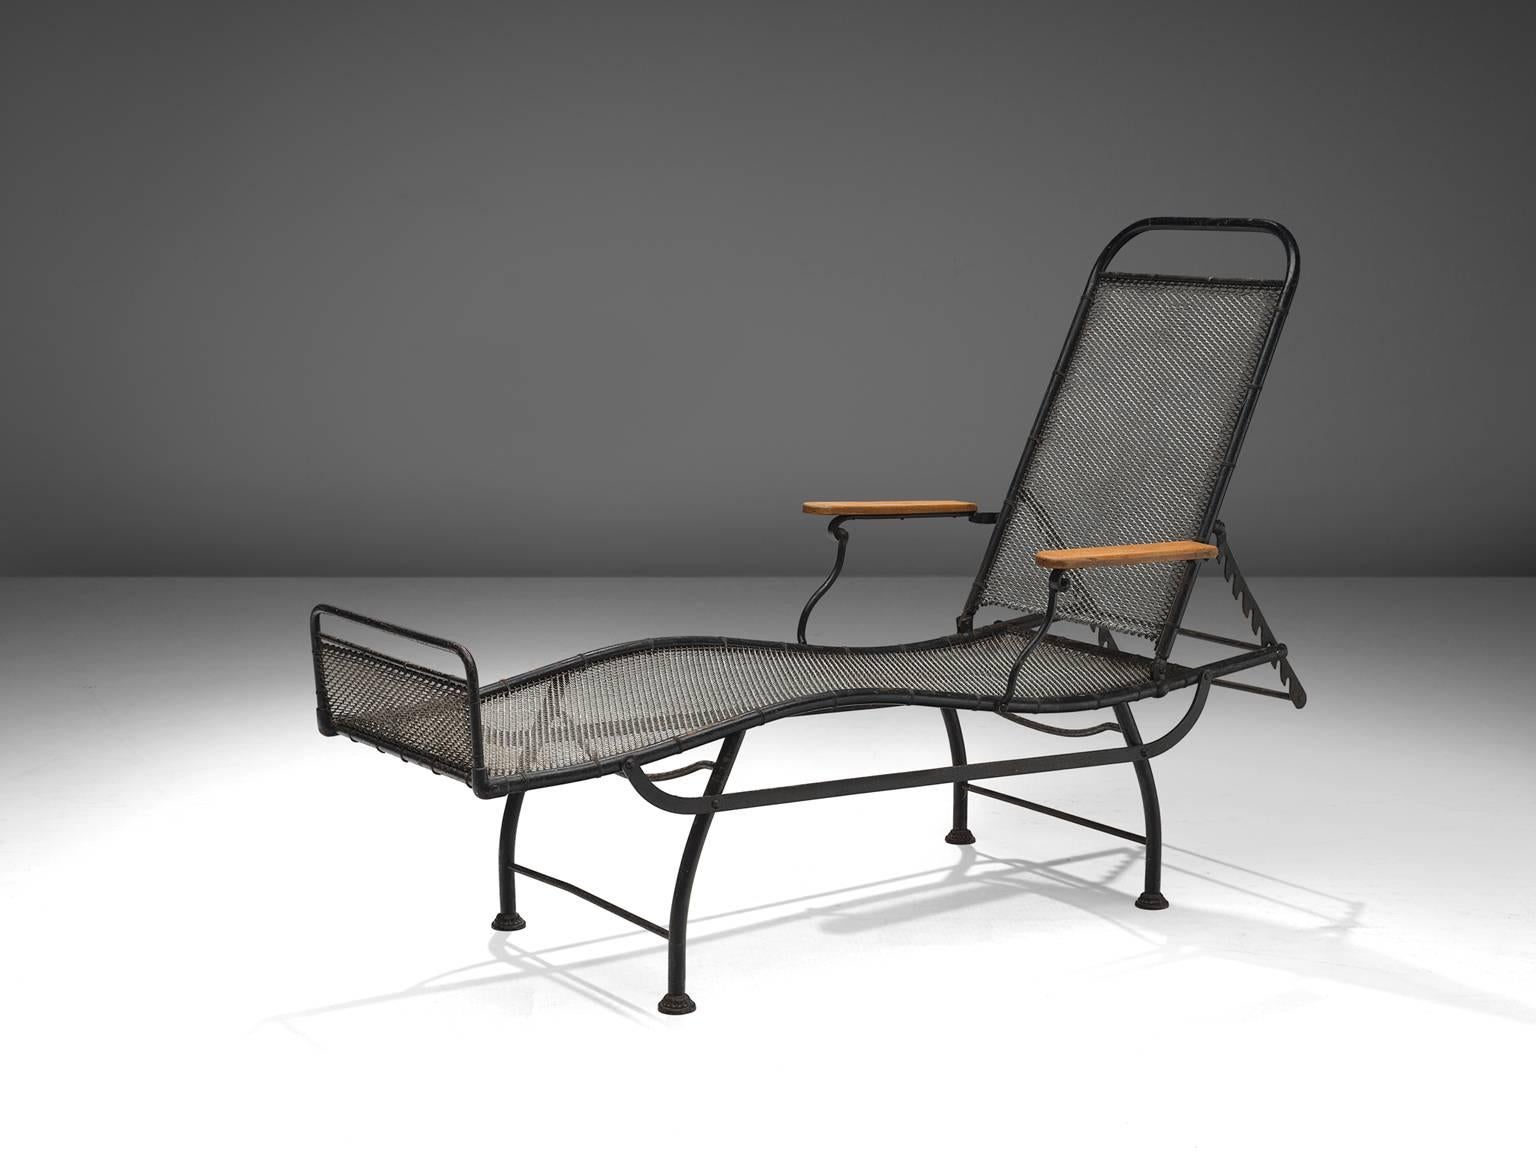 Daybed, black coated iron, wood, France, 1930s.

The back of this daybed is fully adjustable and has some well worked out details in the iron works. The blond wooden armrests provide both an aesthetic and functional contrast to the black coated